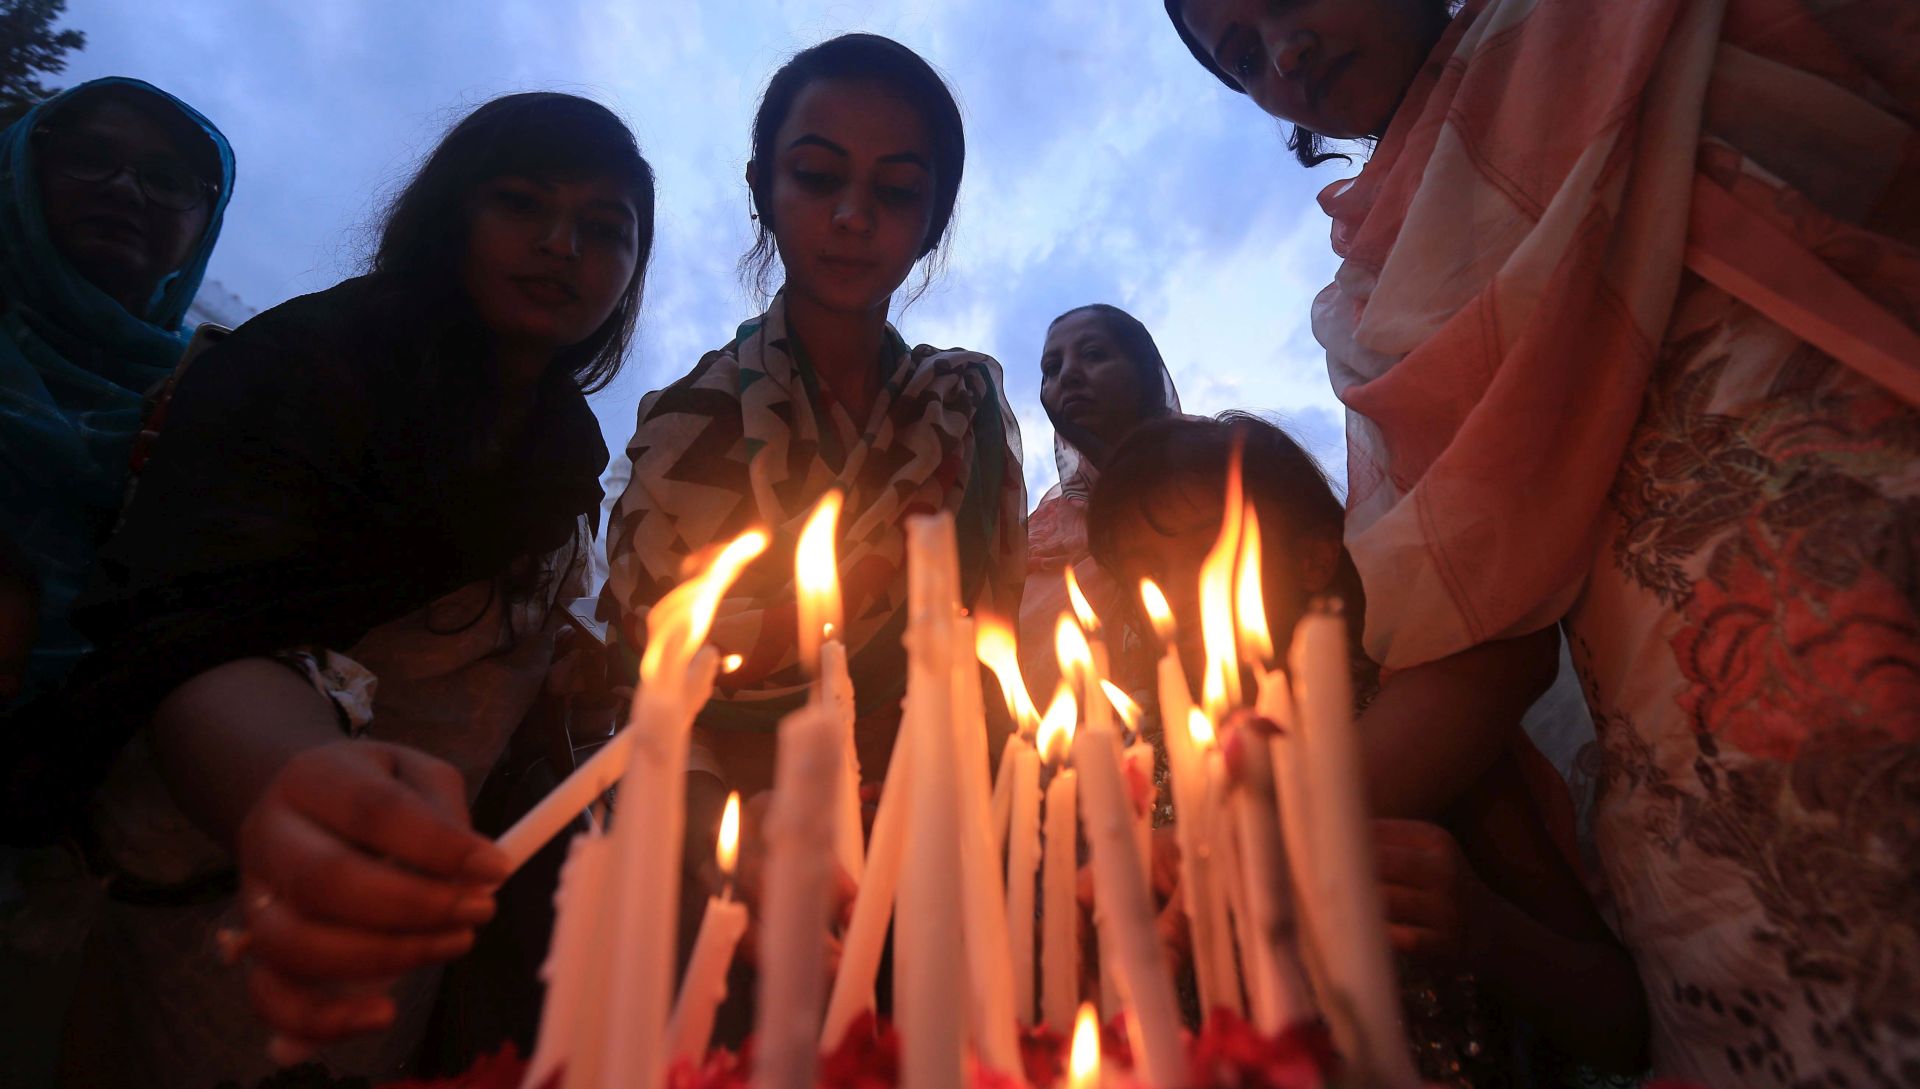 epa07525845 Pakistani Christians light candles to commemorate the victims of the Sri Lanka bombing, in Peshawar, Pakistan, 24 April 2019. According to police at least 320 people were killed in a coordinated series of blasts during the Easter Sunday service at churches and hotels in Sri Lanka on 21 April 2019.  EPA/BILAWAL ARBAB